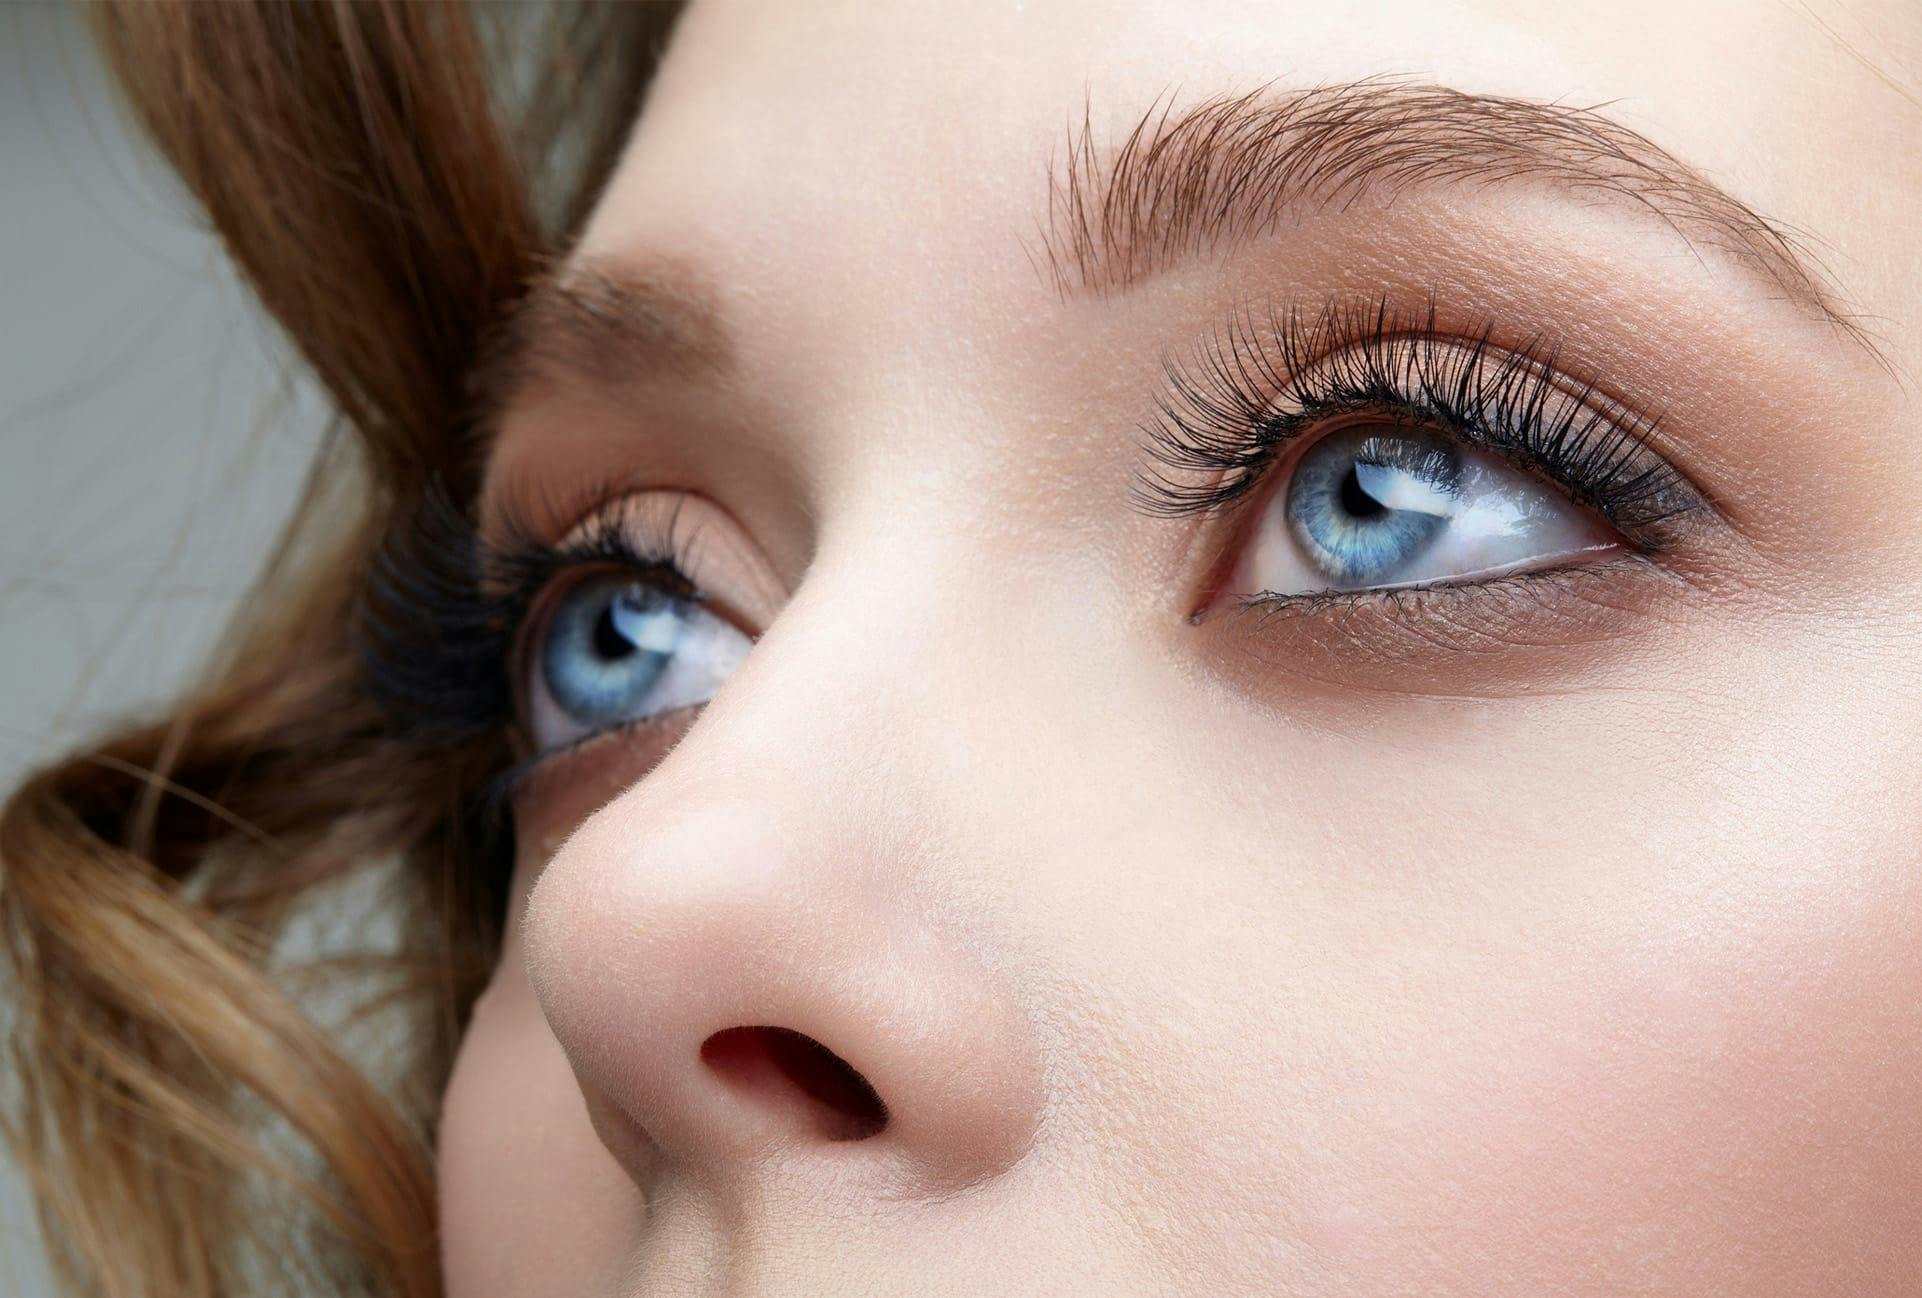 Woman with long eyelashes and blue eyes